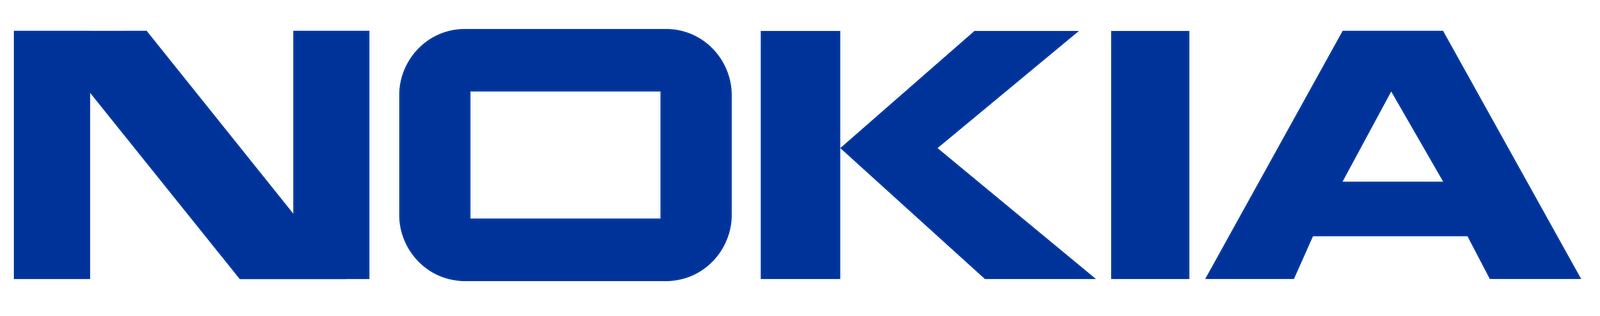 Picture of Nokia Corporation